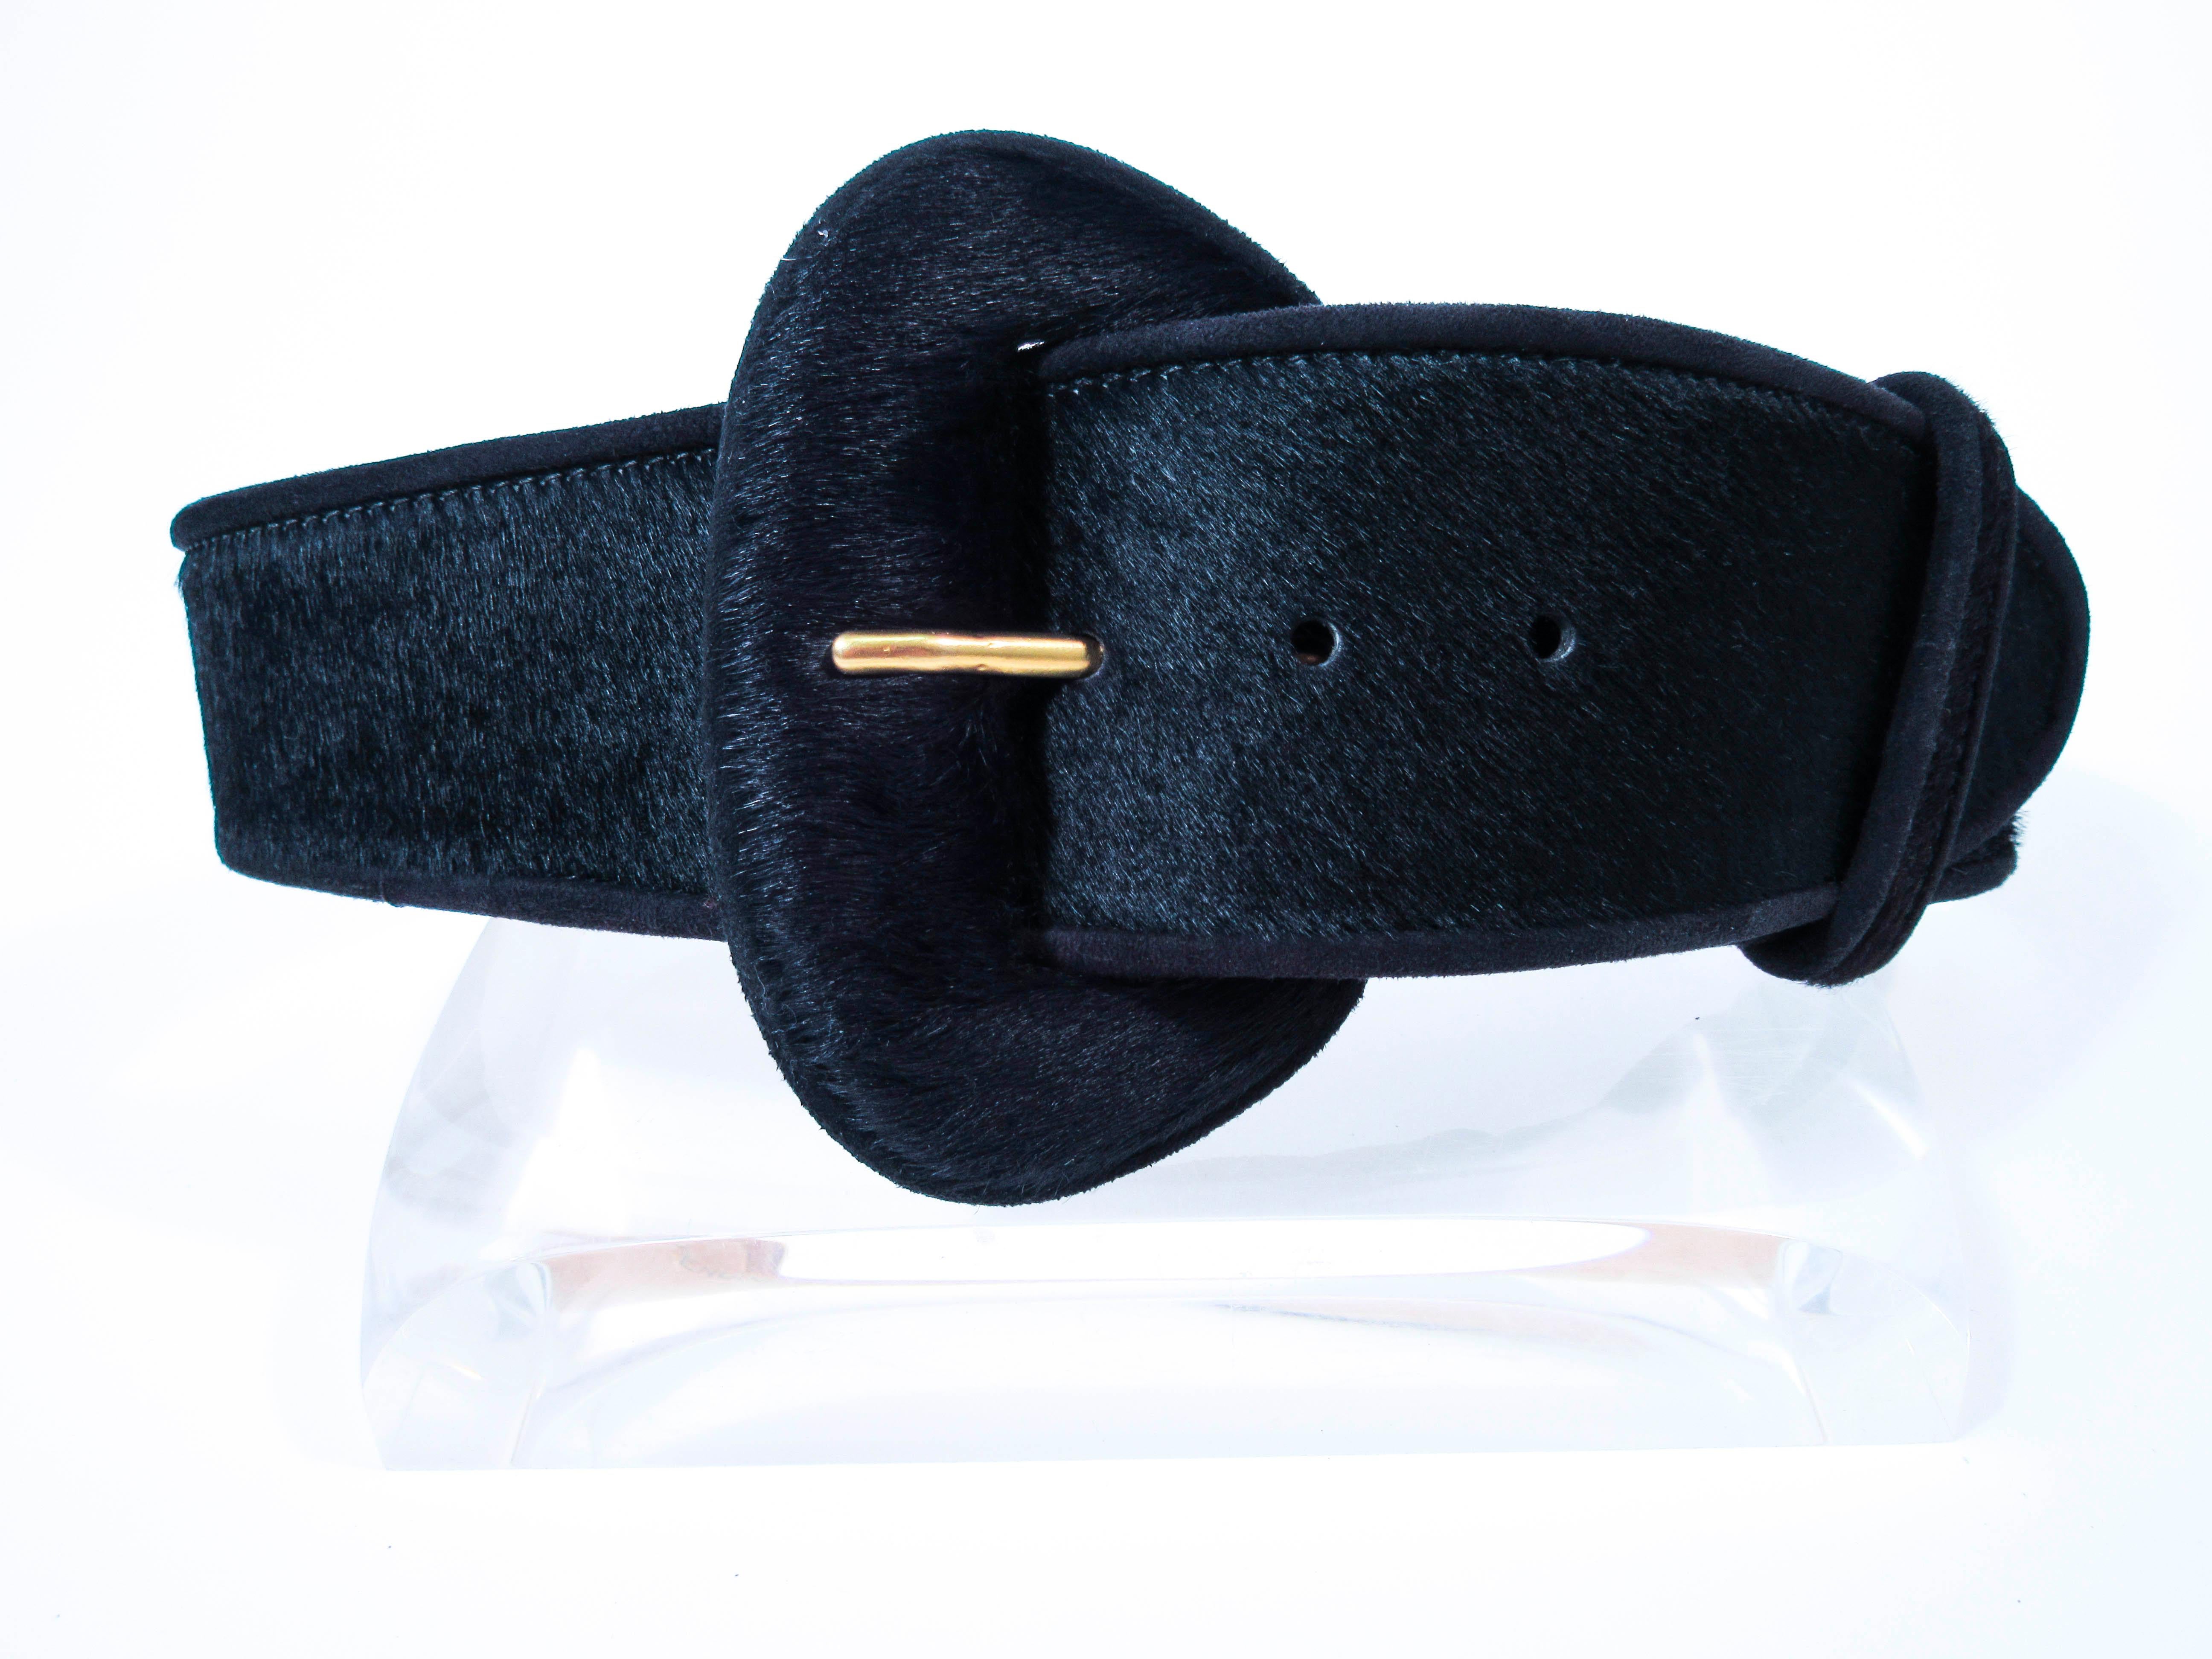 This vintage Donna Karan belt is composed of a black cowhide. Features a classic wide style high waist style. This is a fantastic statement piece and excellent addition to any collectors wardrobe. In excellent pre-owned condition (some signs of wear